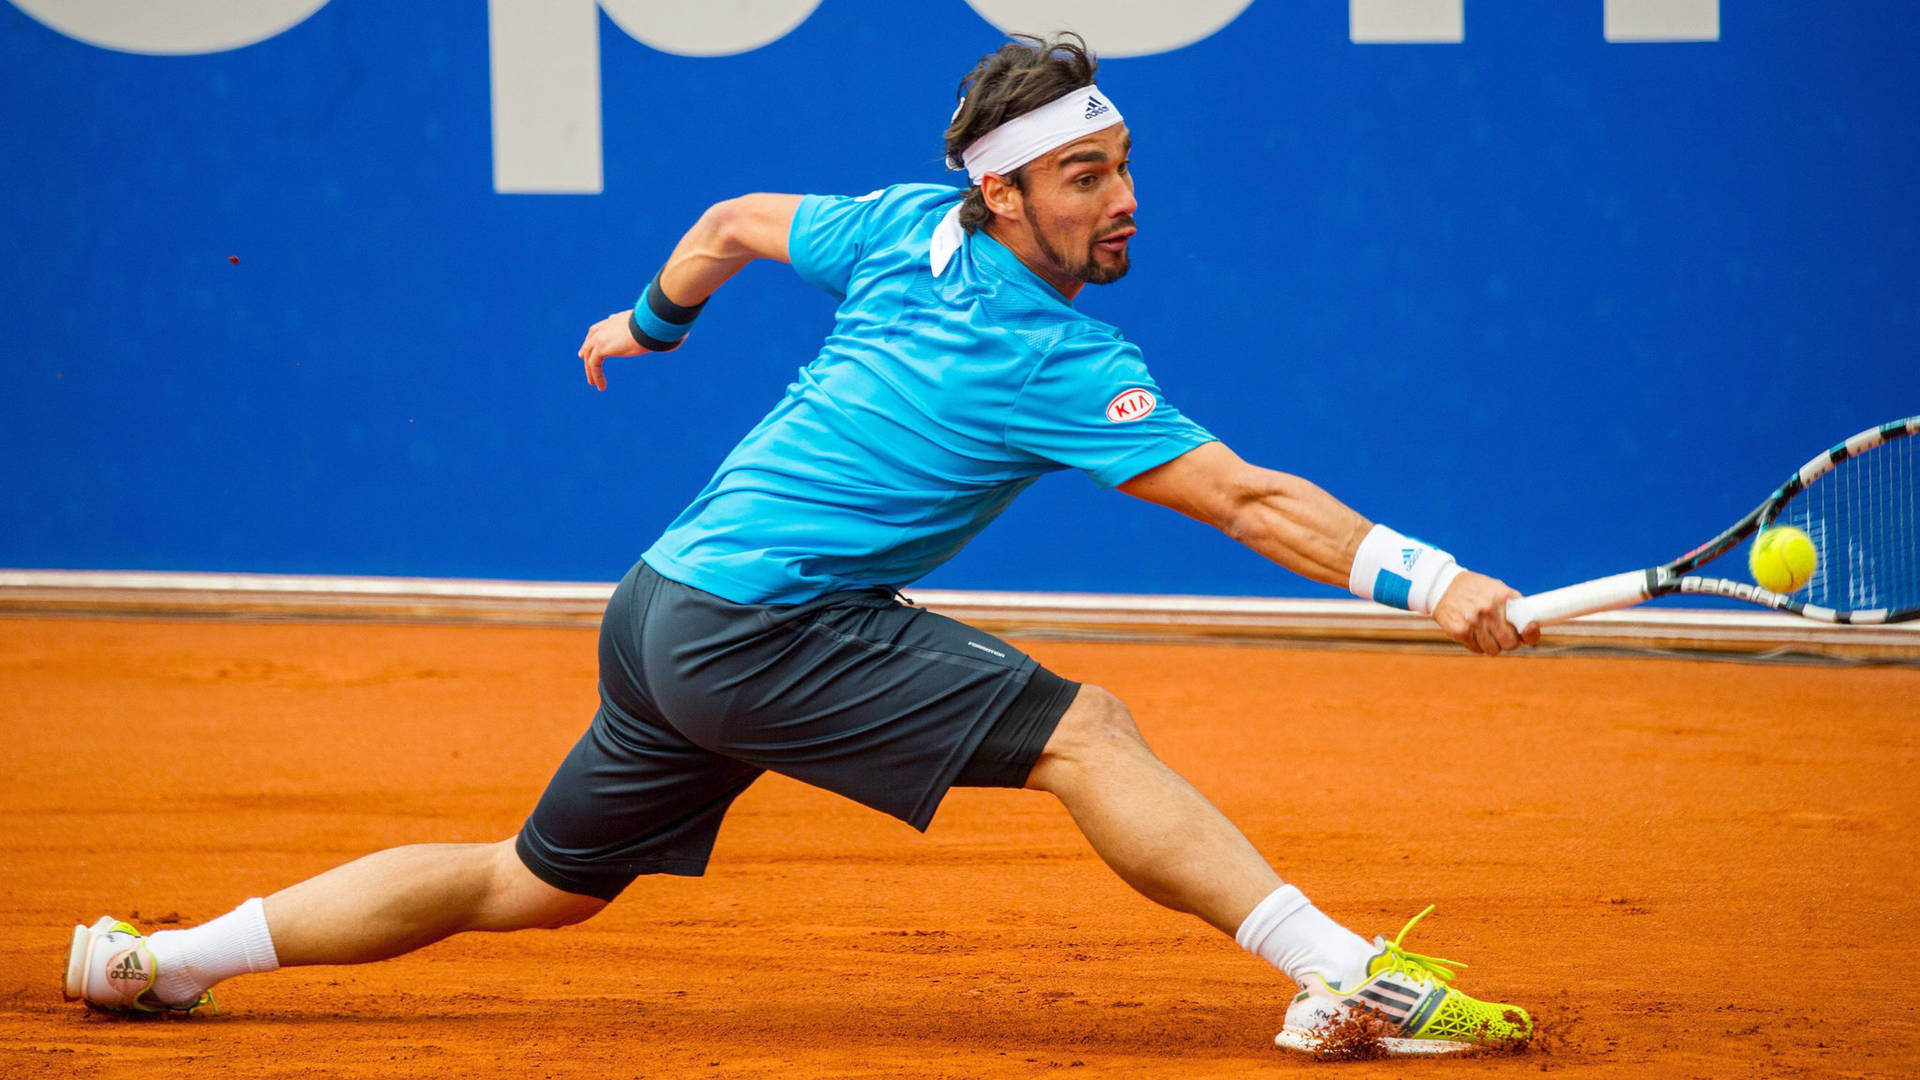 Fabiofognini Sträcker Sig För Att Nå Bollen. (this Could Potentially Be Used As A Caption For A Wallpaper Image Of Fabio Fognini Playing Tennis And Reaching For The Ball.) Wallpaper